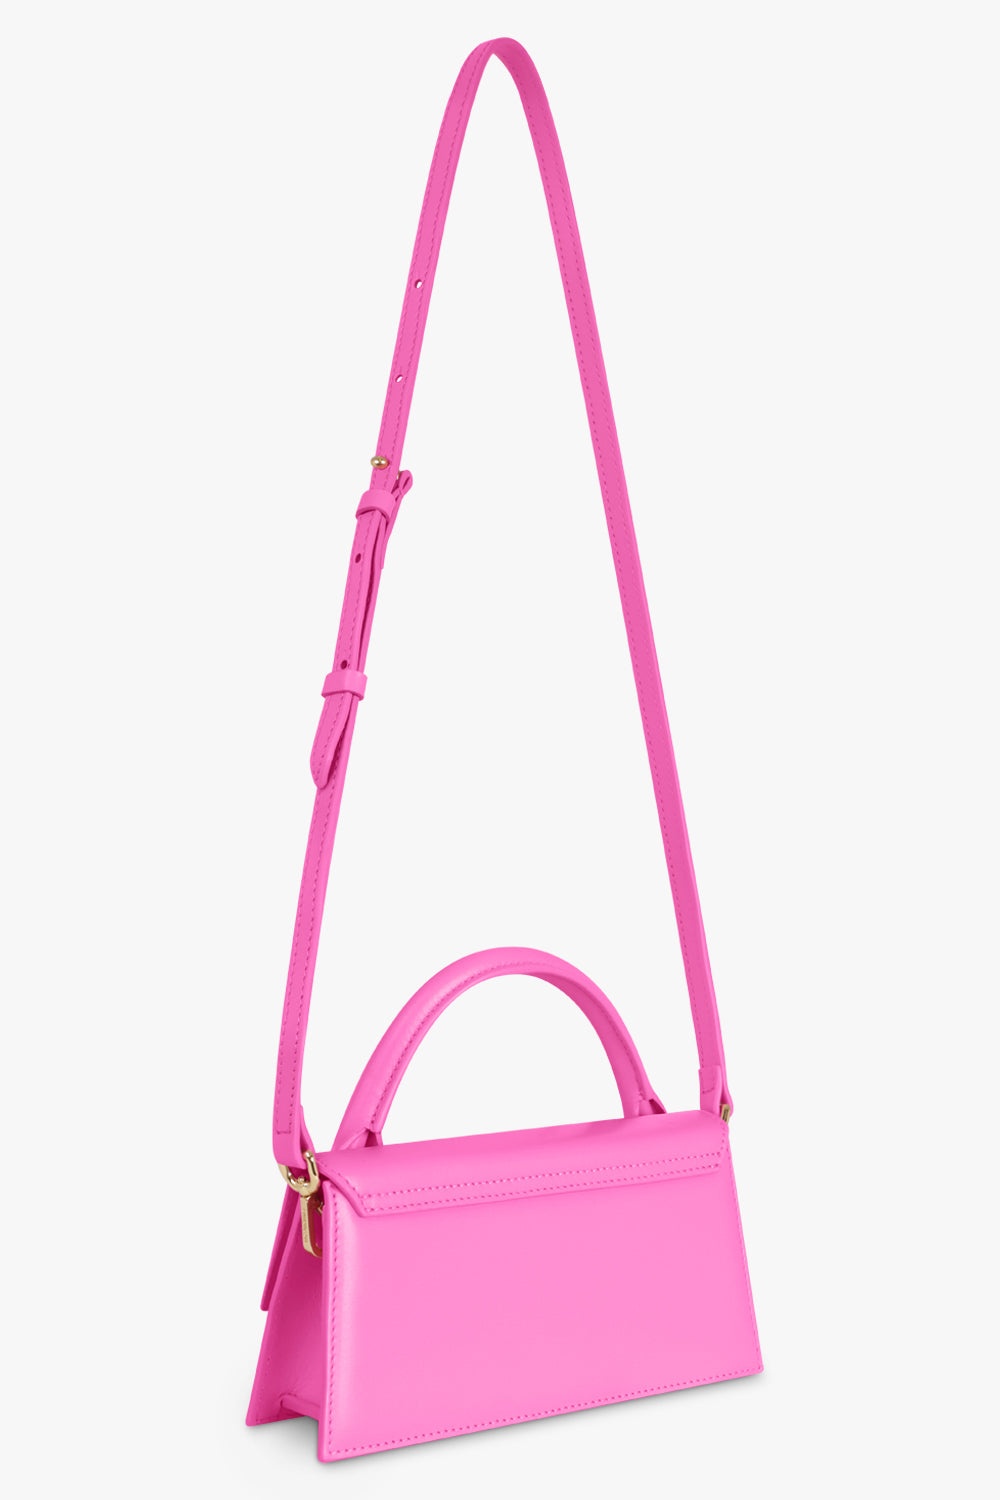 LE CHIQUITO LONG BAG | NEON PINK - 2